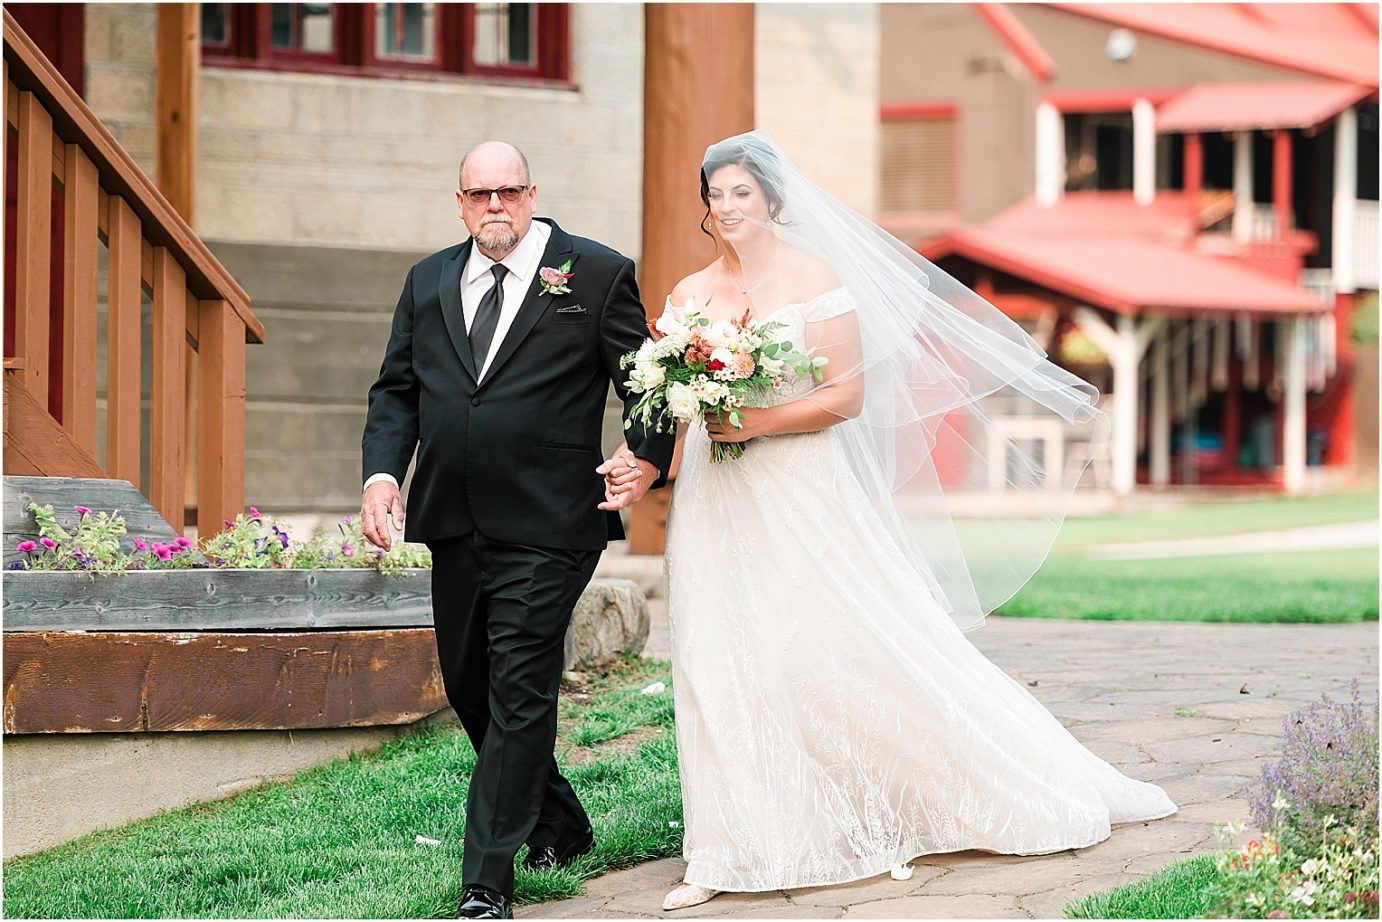 Intimate Pine River Ranch Wedding Leavenworth Photographer Jon and Kristen walking down the aisle with dad